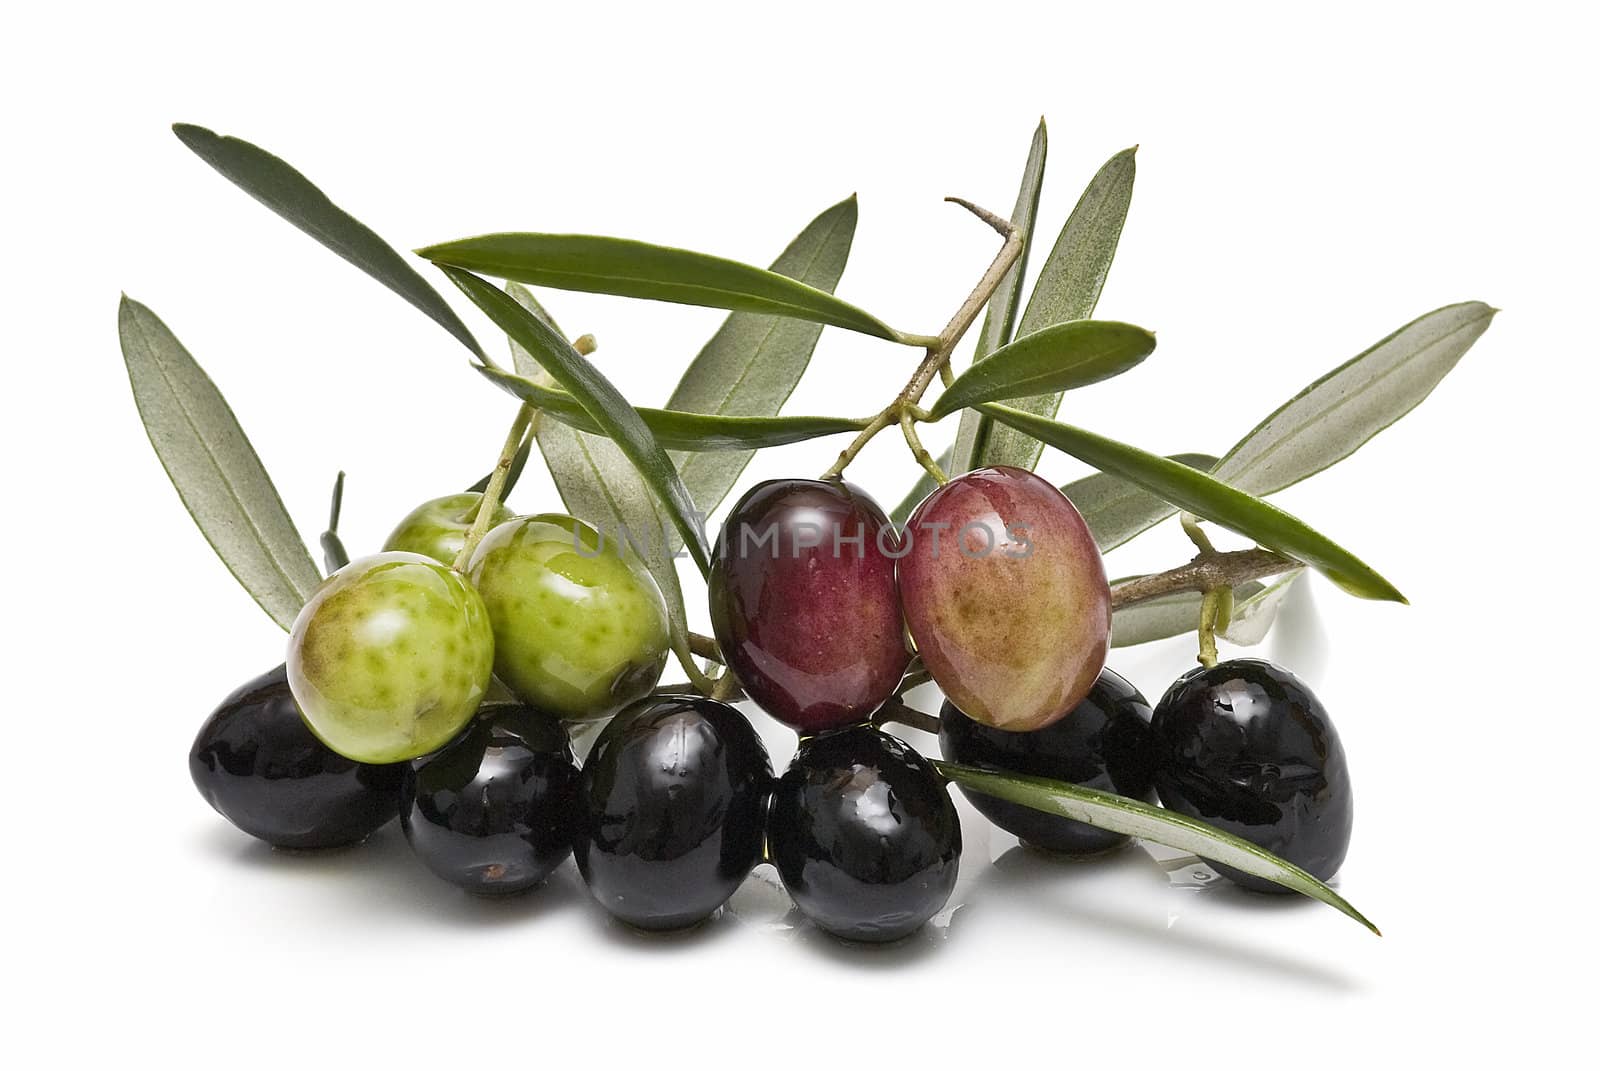 Some branches with olives and leaves.